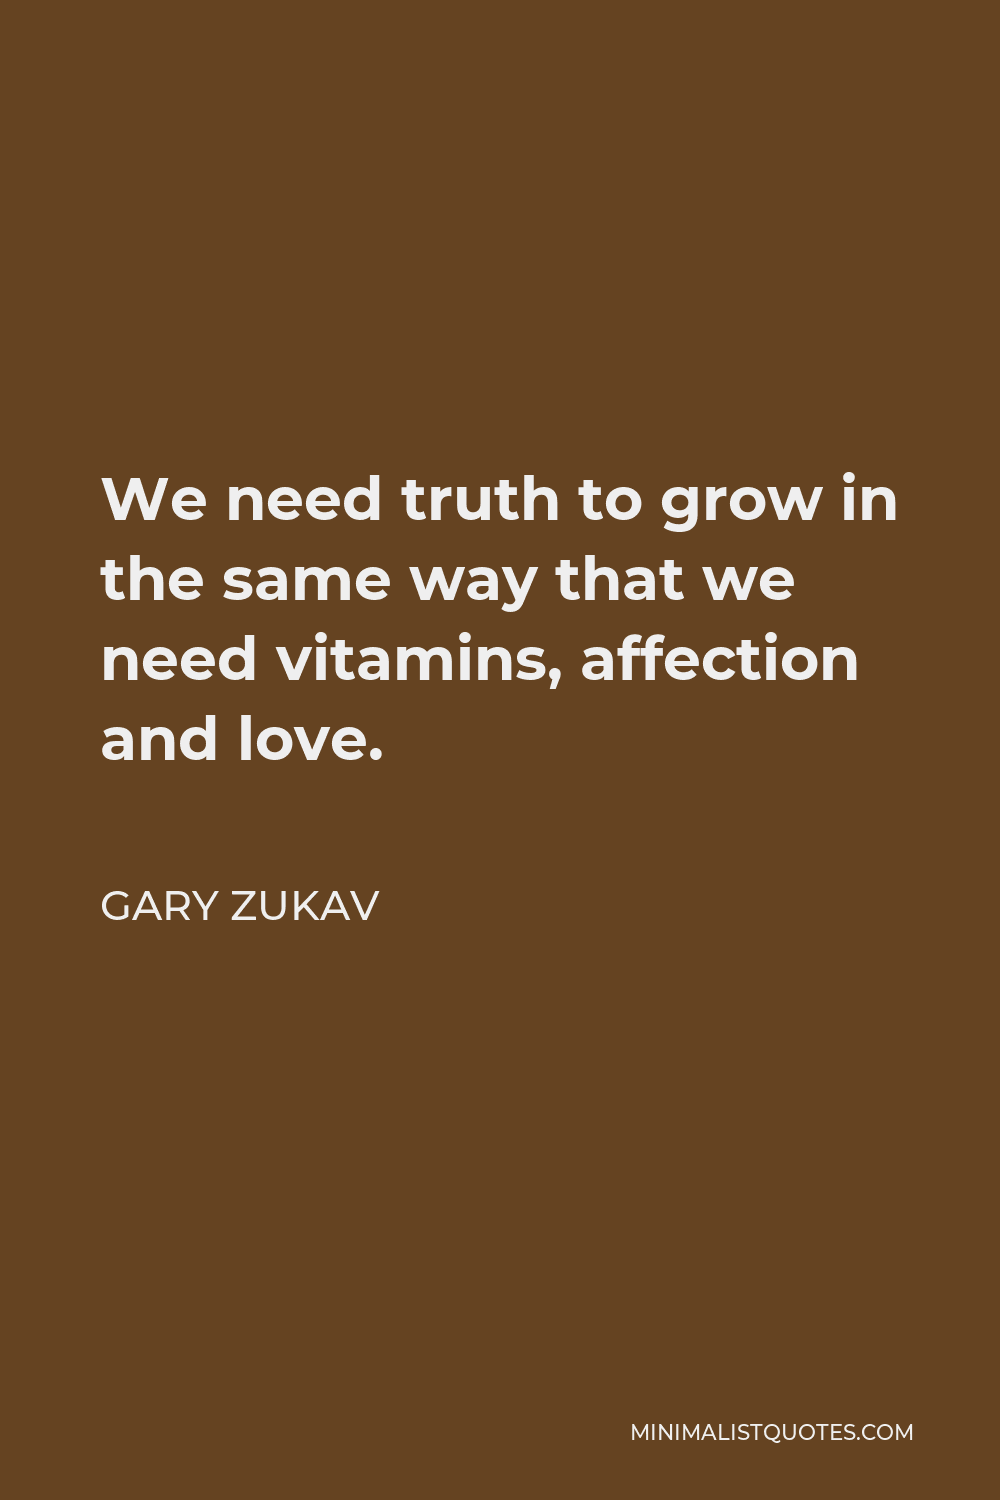 Gary Zukav Quote - We need truth to grow in the same way that we need vitamins, affection and love.